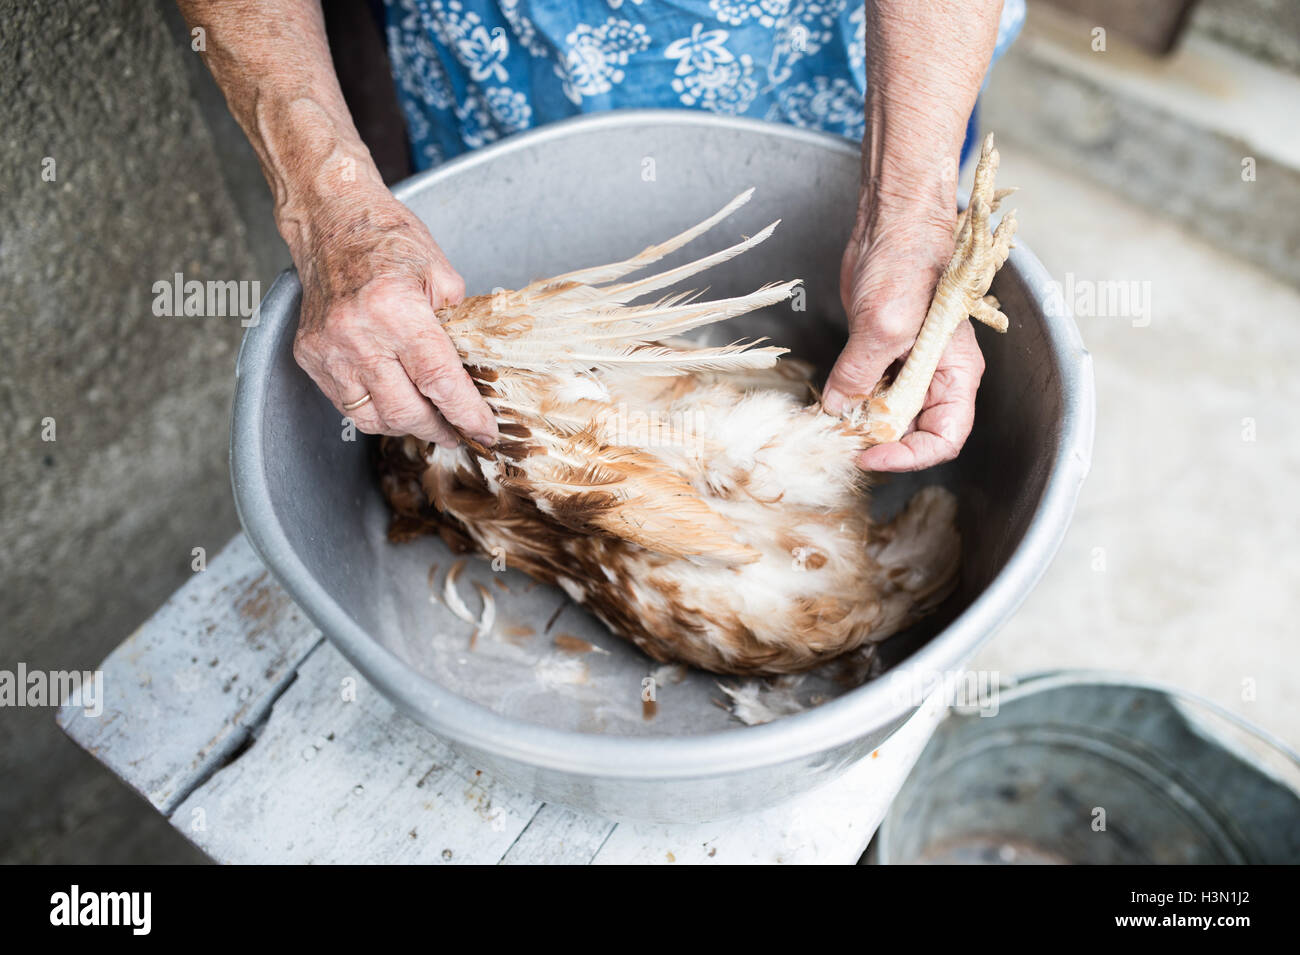 Woman Slaughtering Chickens